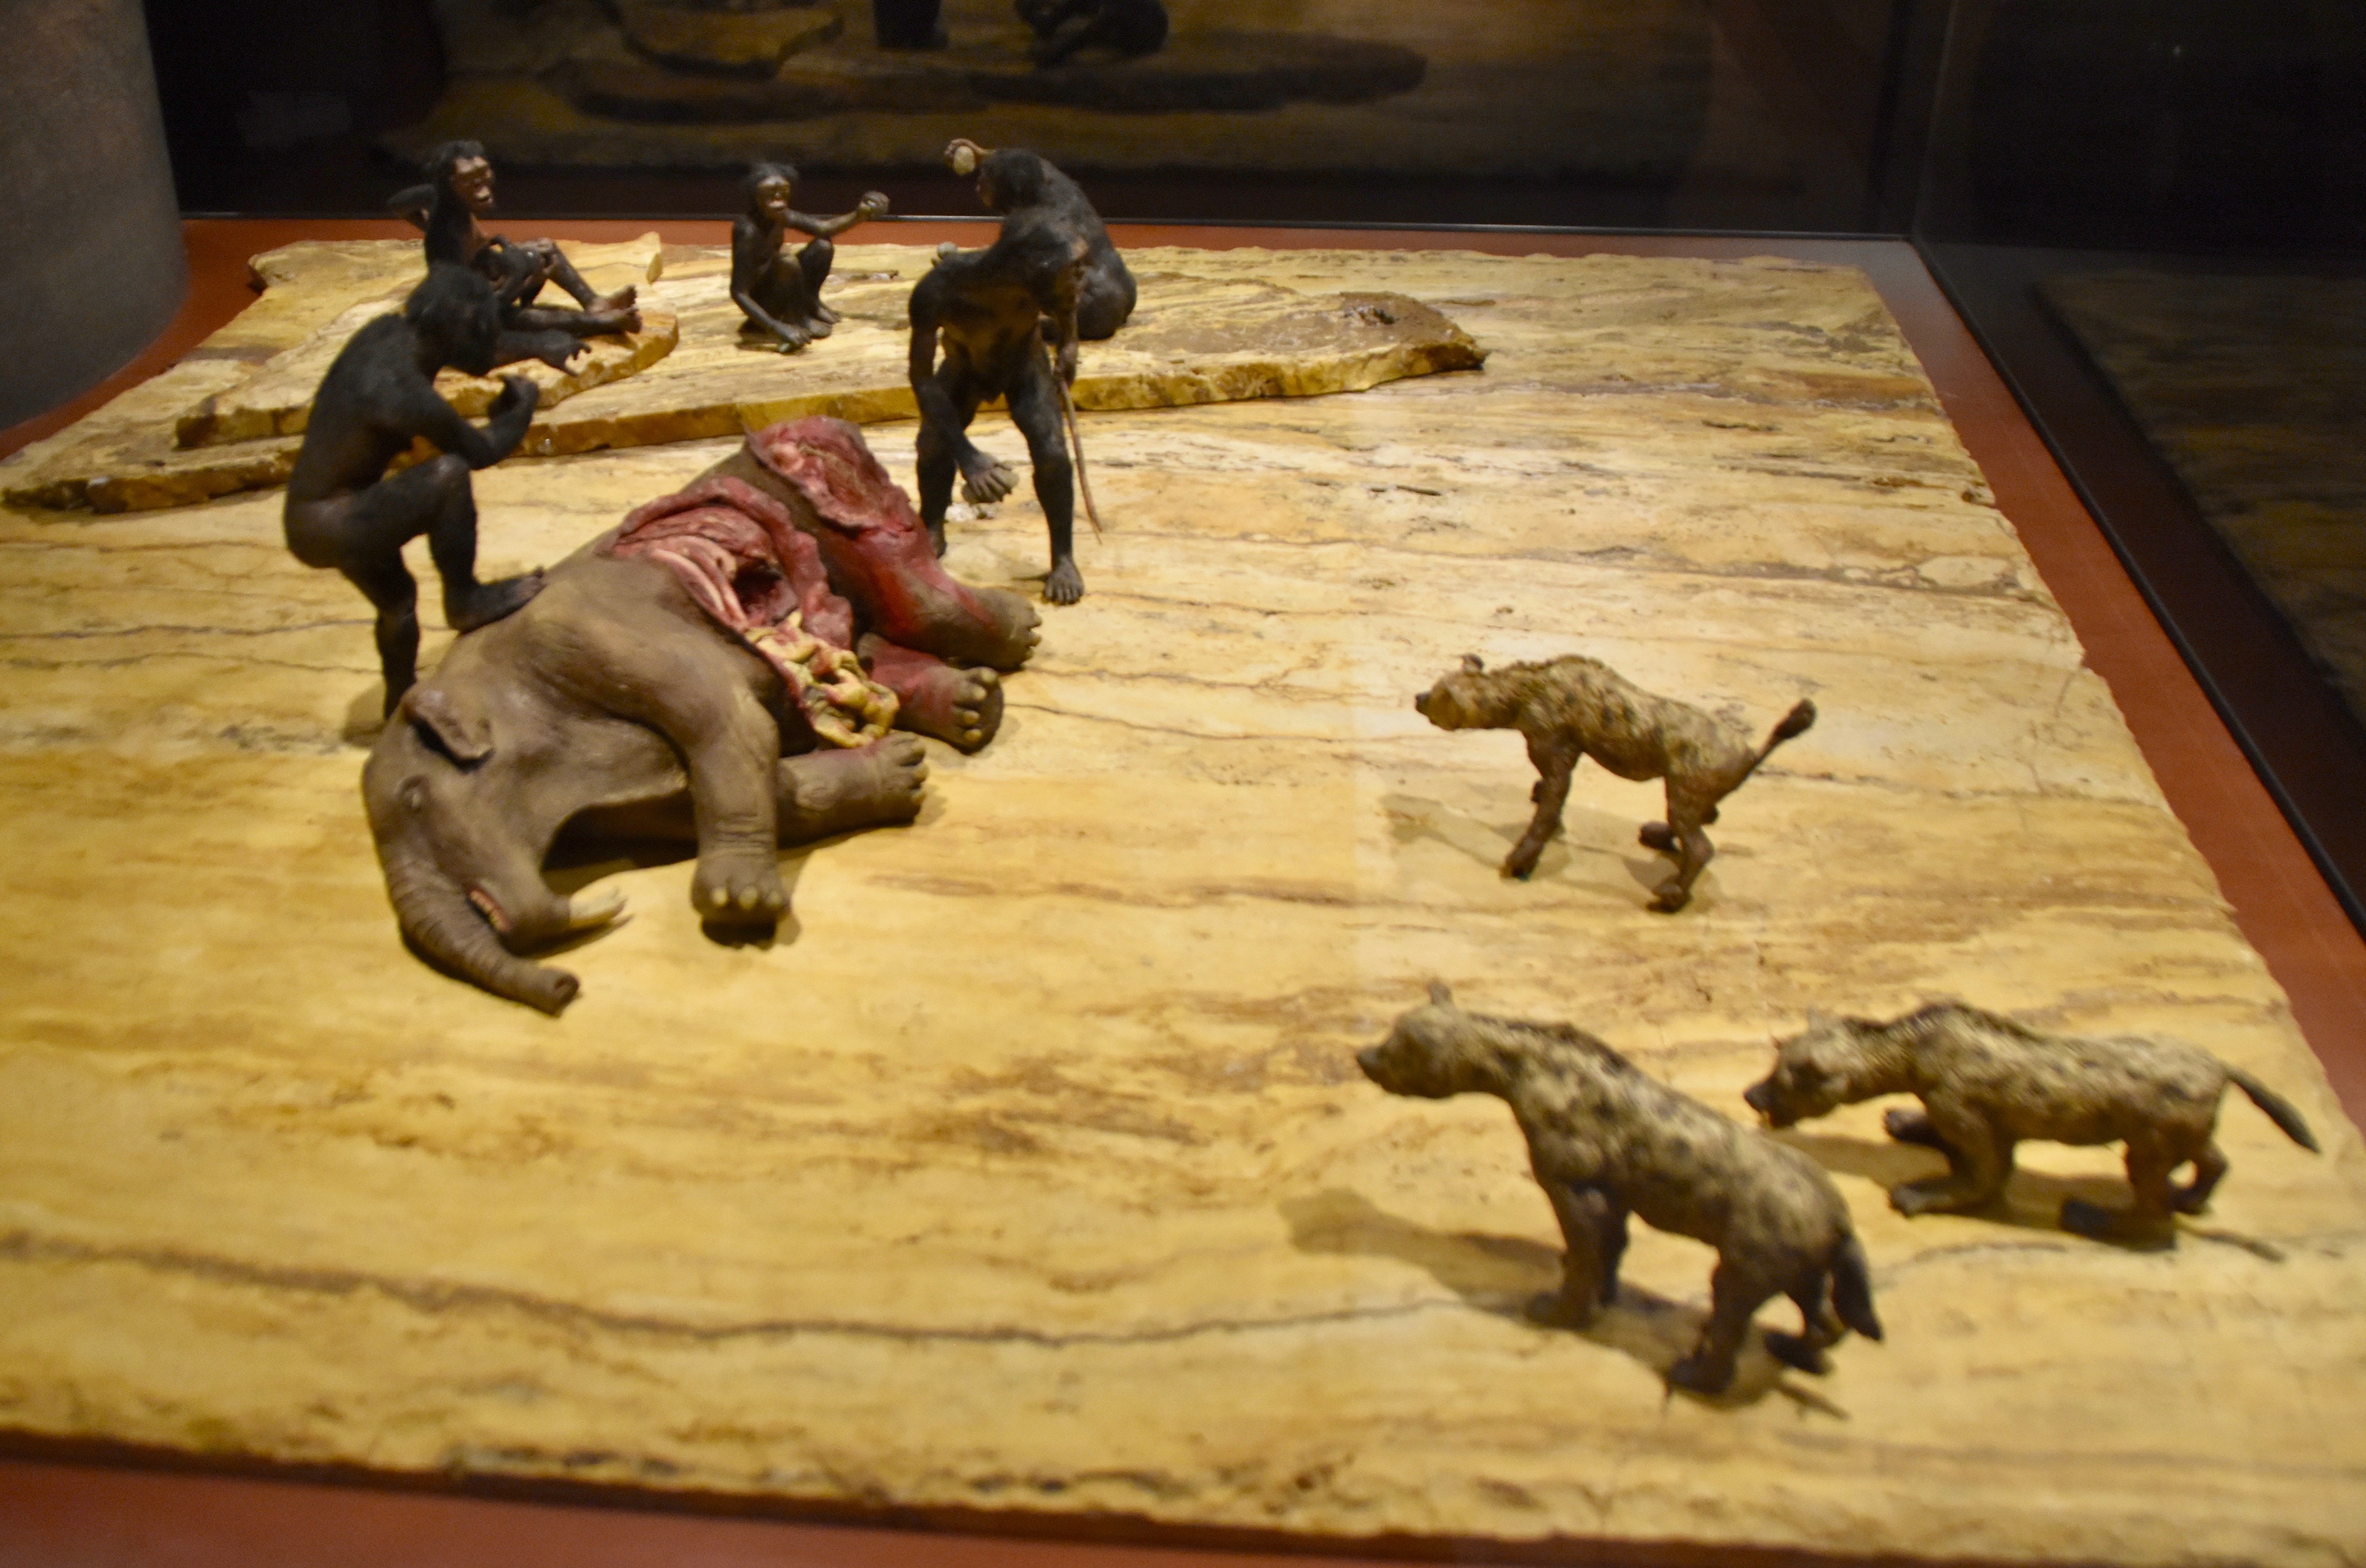 The Eating of Meat, National Anthropological Museum